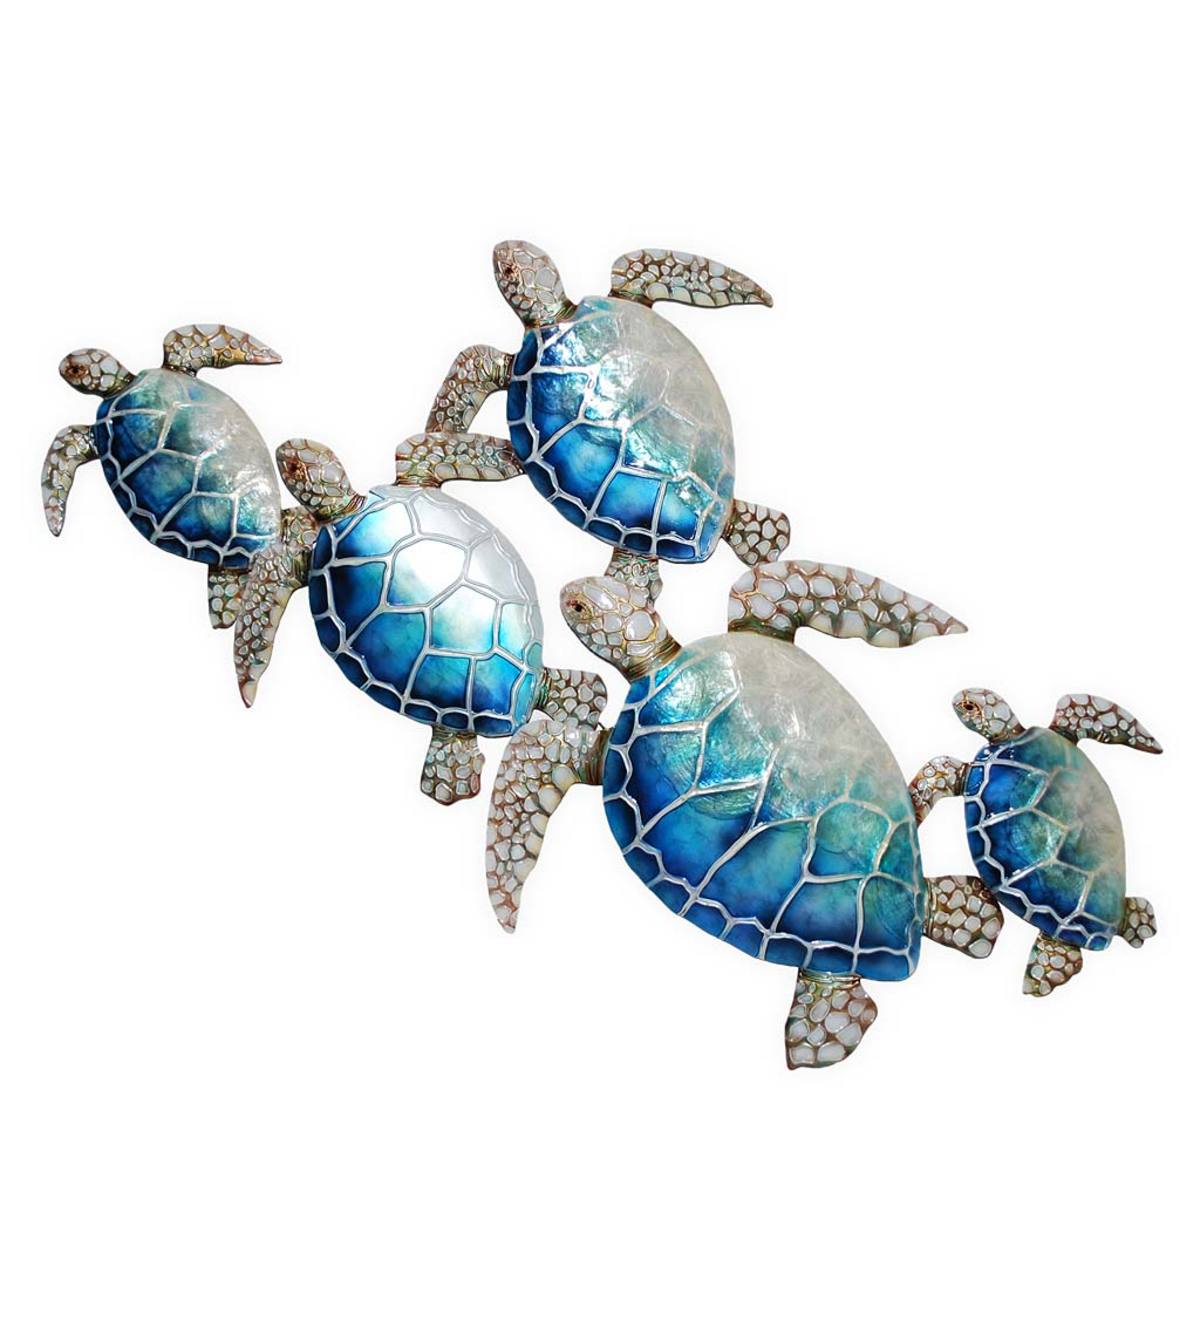 Handcrafted Metal and Capiz Sea Turtles Wall Art | All ...